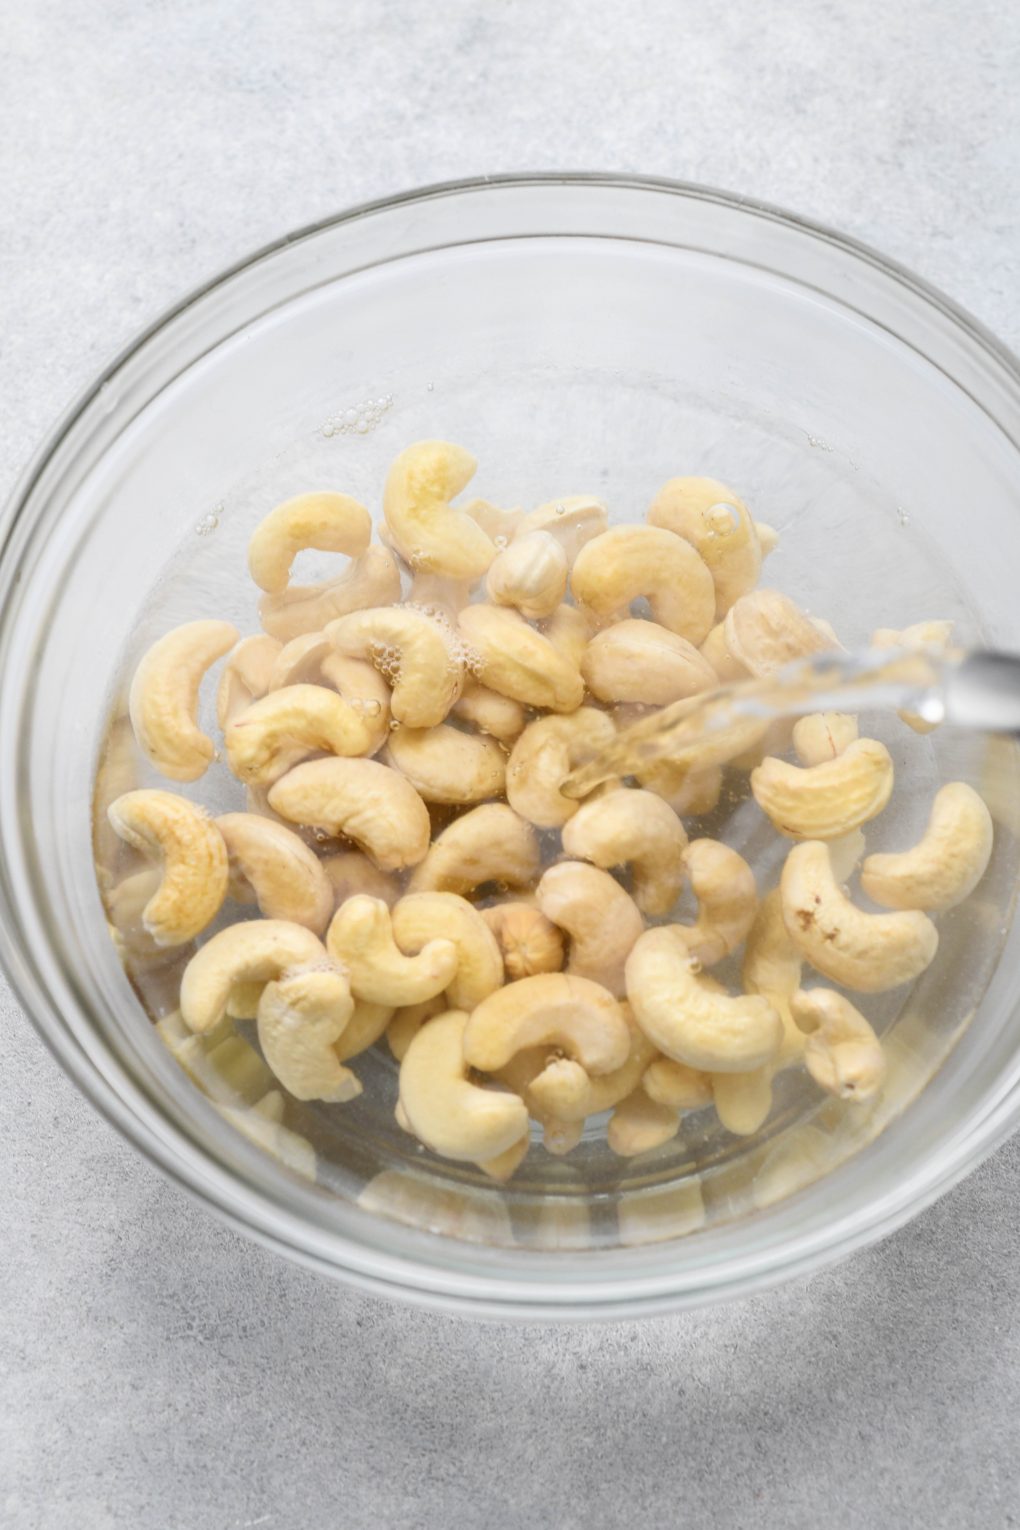 Raw cashews in a glass bowl being filled with hot water.